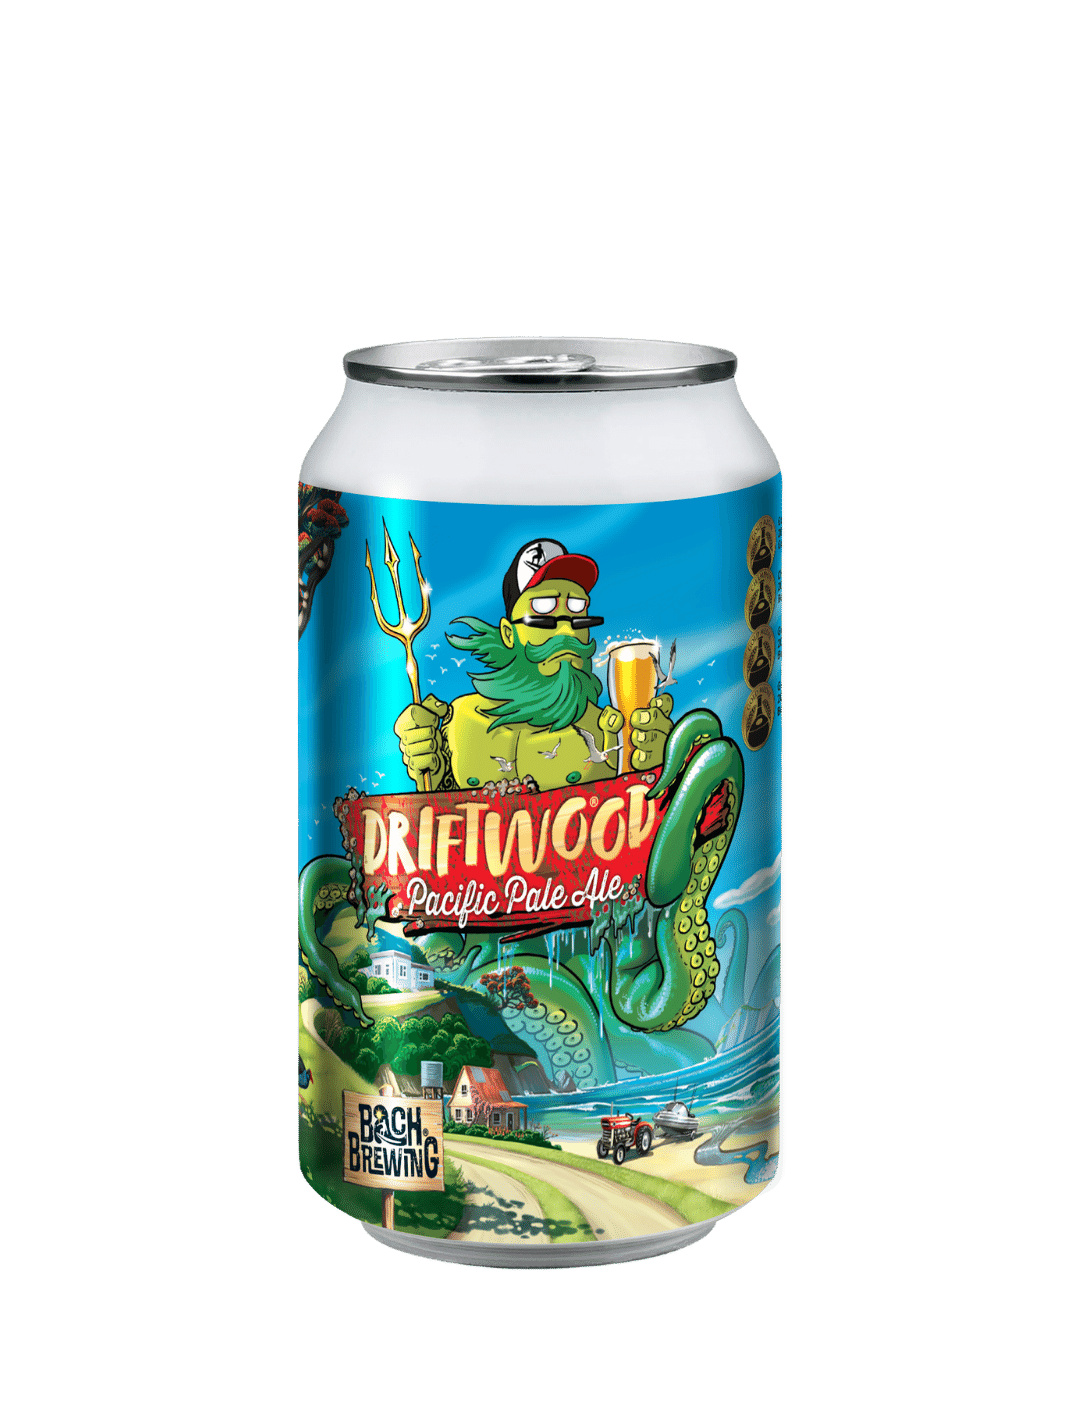 Driftwood Pacific Pale Ale